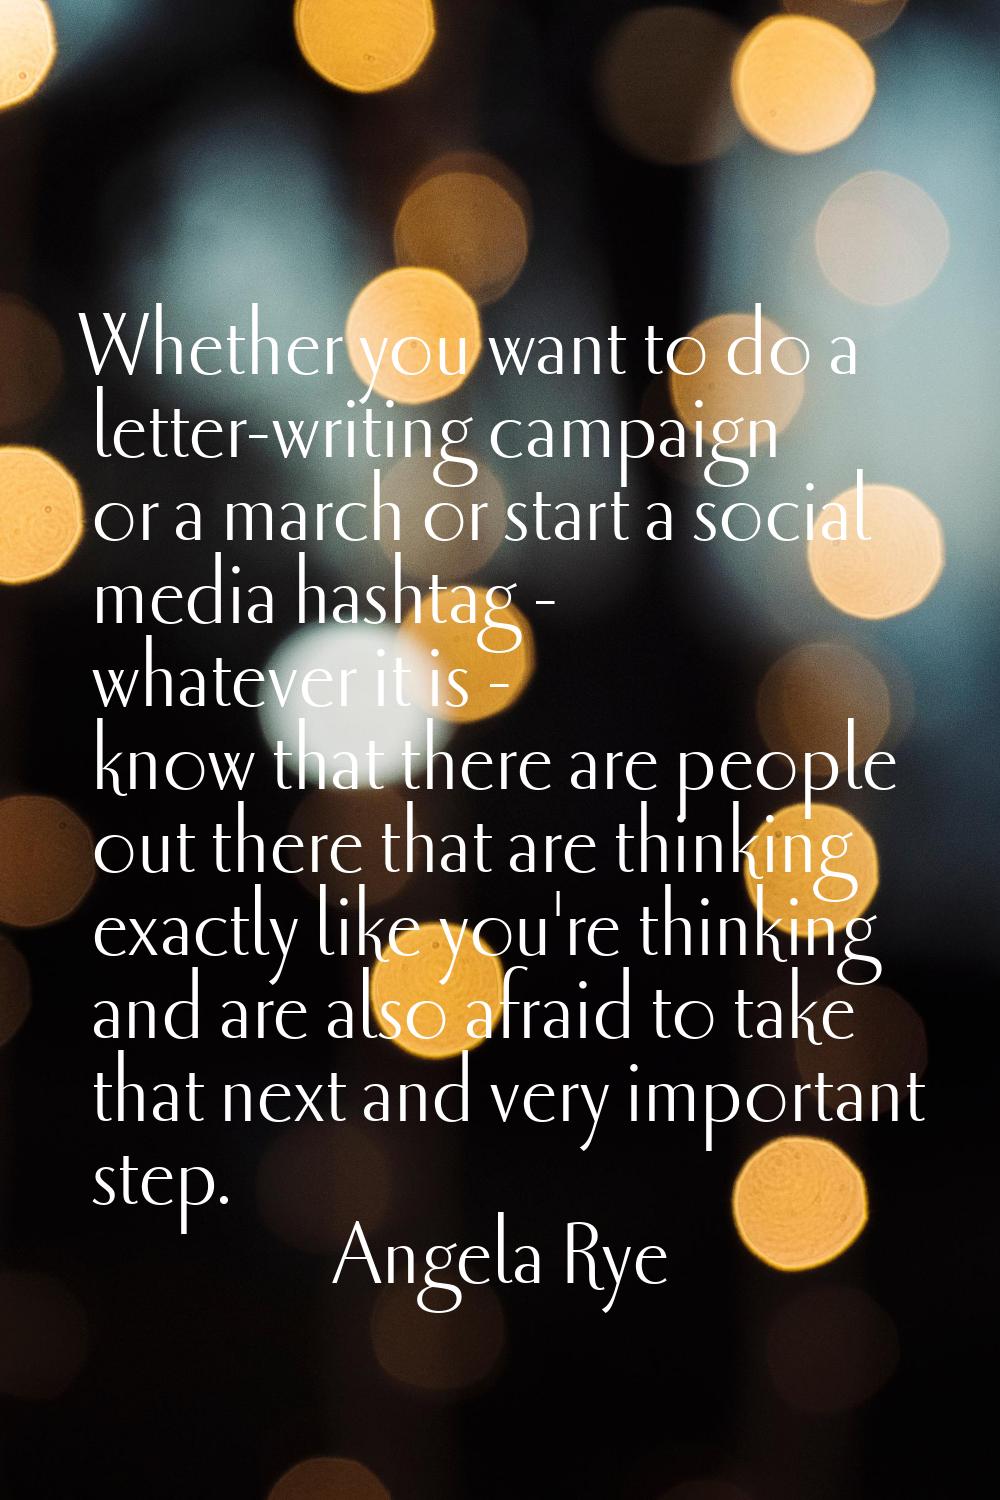 Whether you want to do a letter-writing campaign or a march or start a social media hashtag - whate